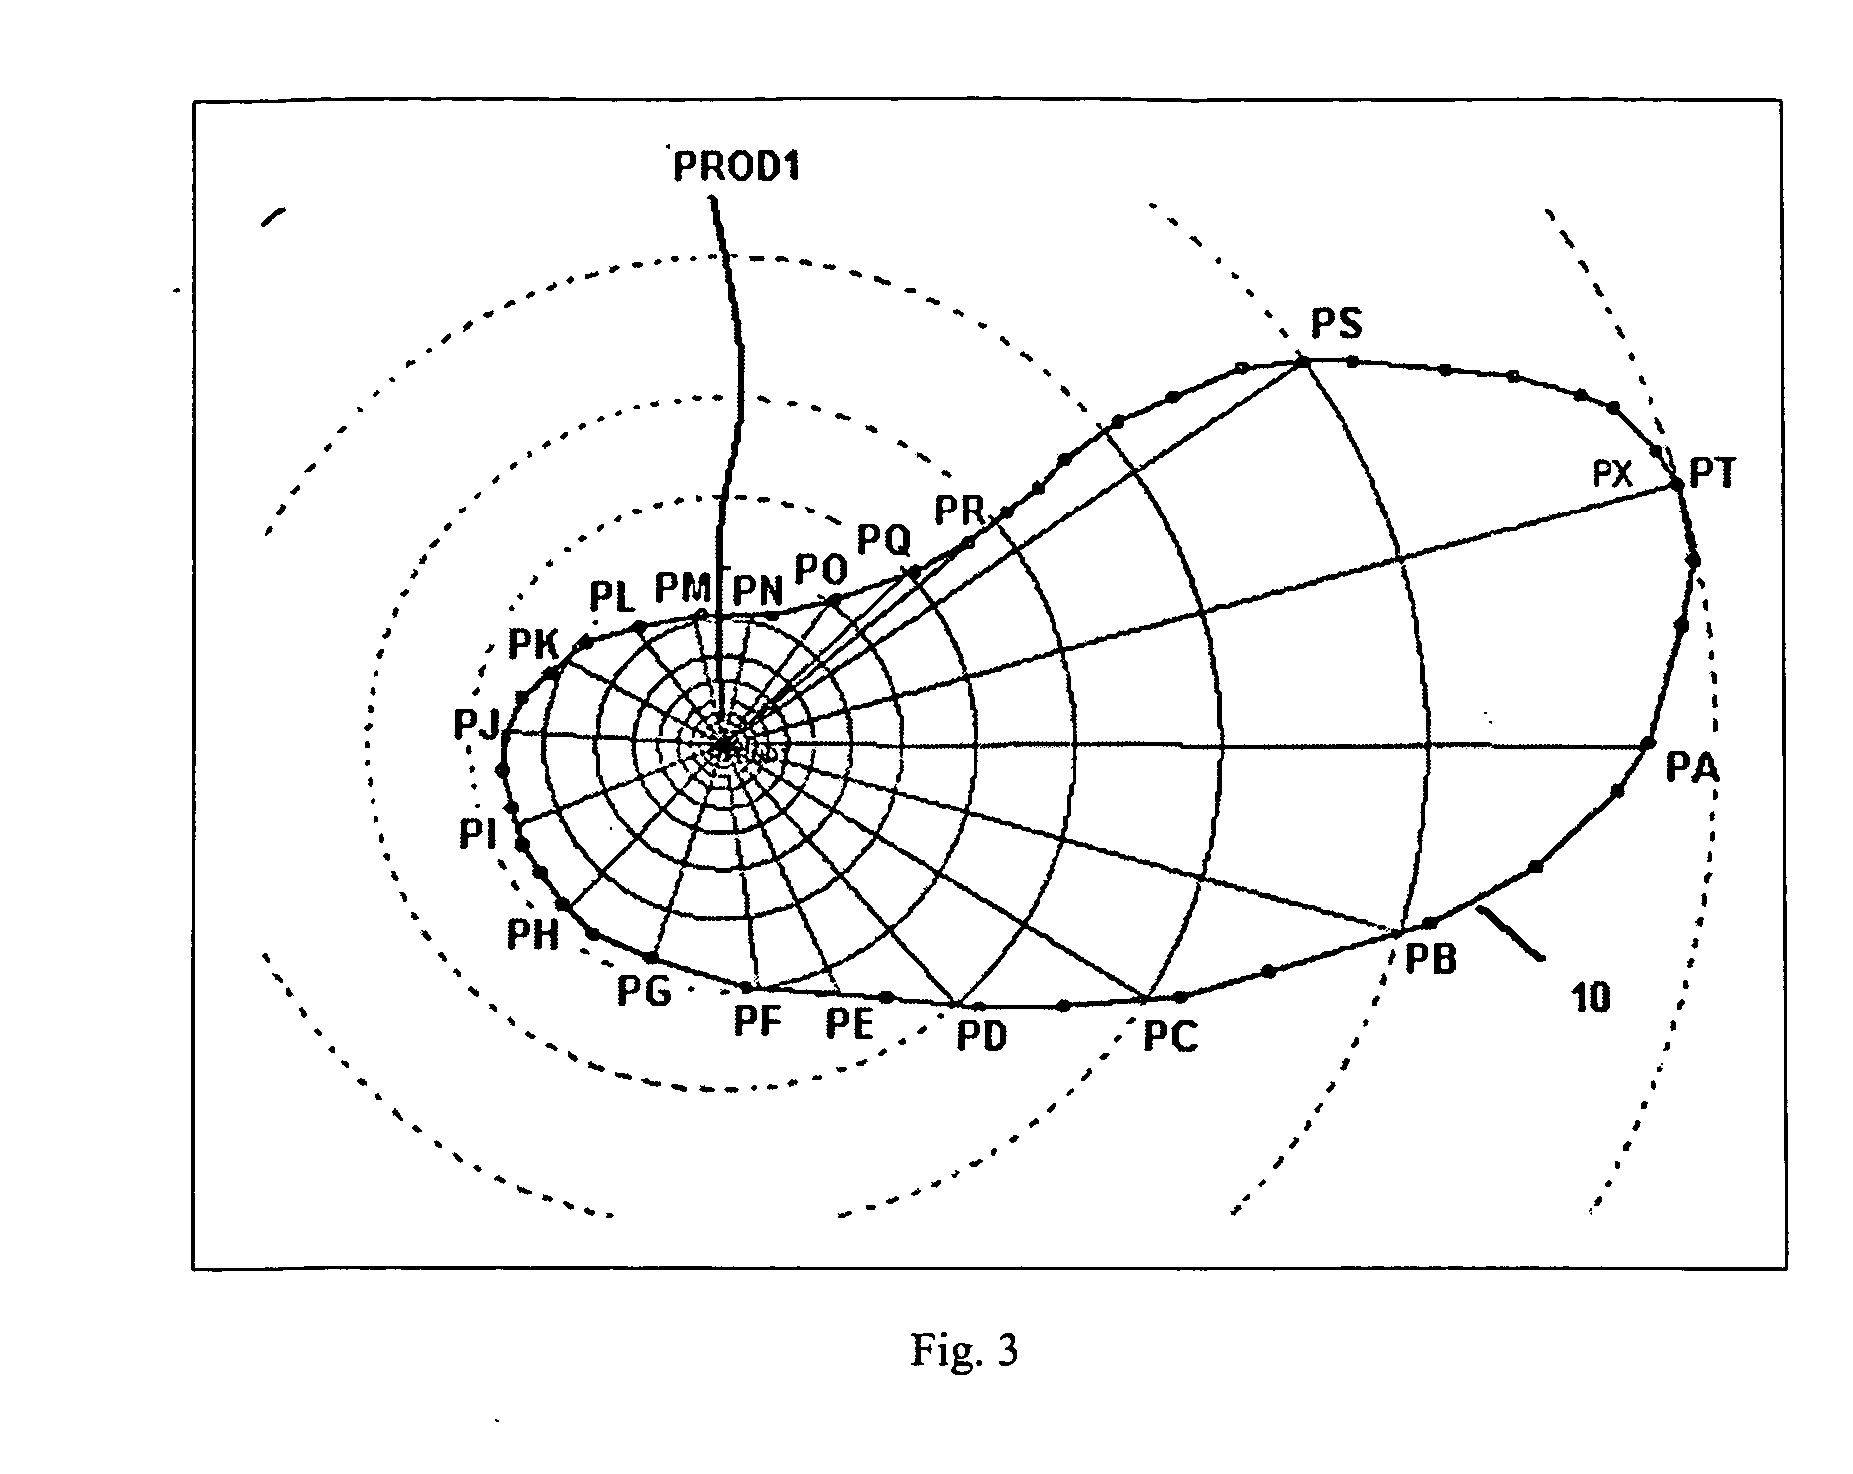 Method for producing full field radial grid for hydrocarbon reservoir simulation